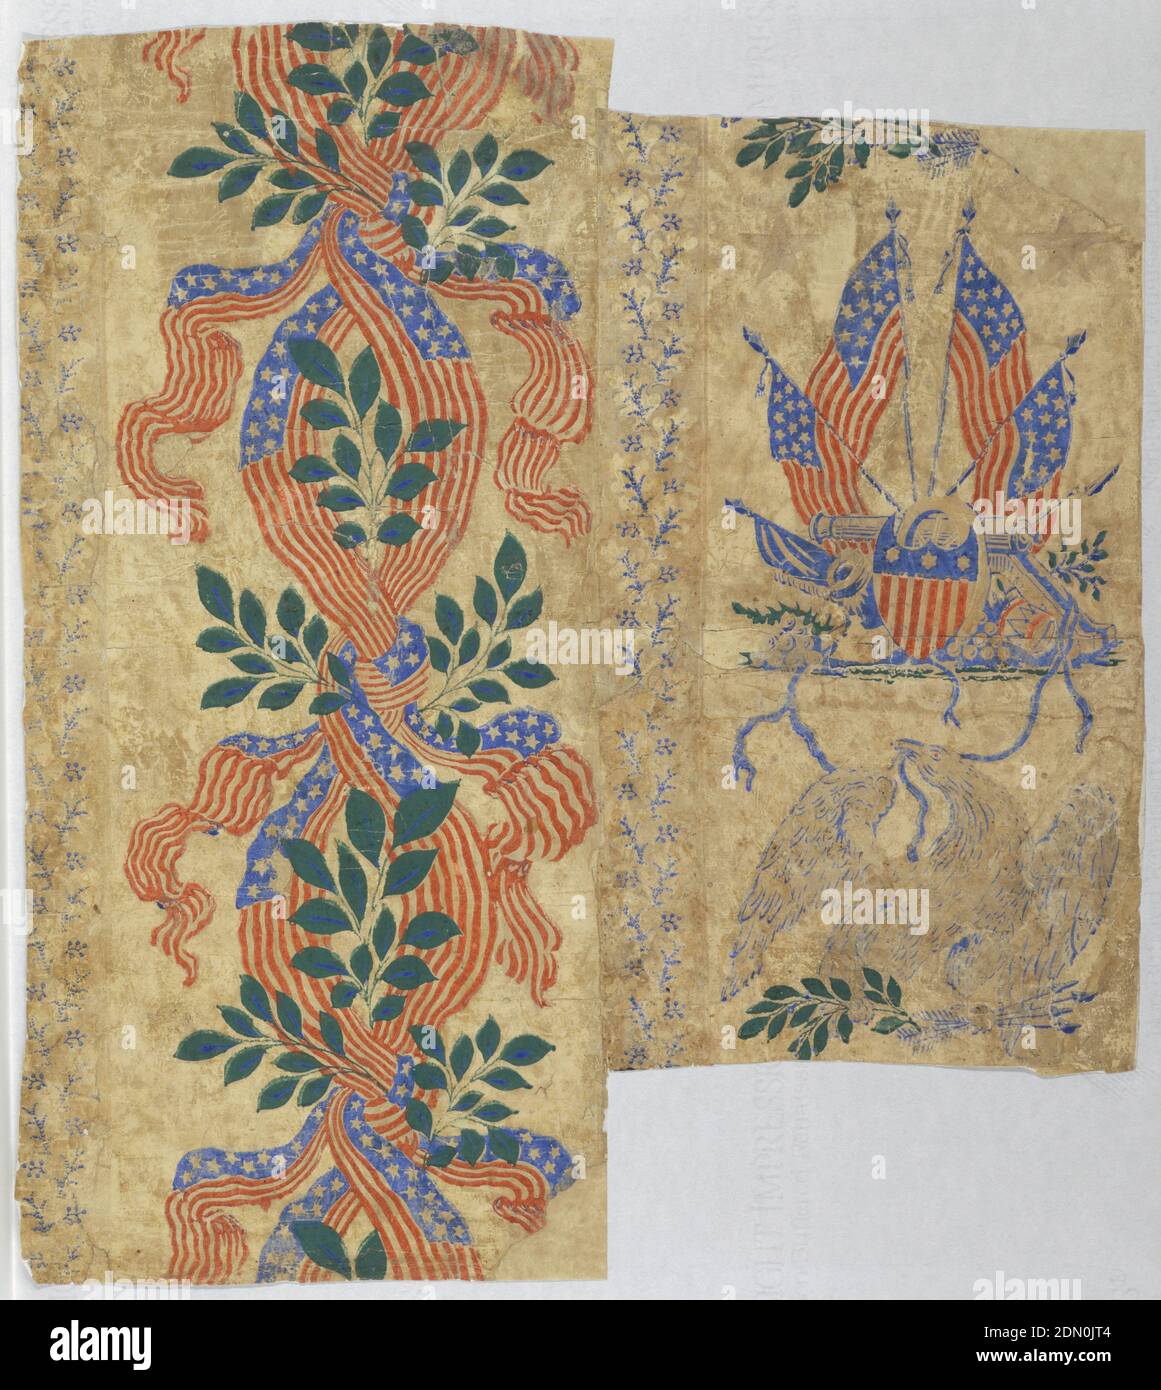 Sidewall, Machine-printed on cotton rag paper, 2 different designs mounted on support. Narrow band of blue foliate sprigs on left edge, with wider band of American flag ribbons forming guilloche design. Another narrow band of blue foliate sprigs, with wider band containing American flags, cannon, shield and drum, alternating with eagle holding arrows and laurel sprigs. Printed in red, blue and green on off-white ground., USA, 1840–1860, Wallcoverings, Sidewall Stock Photo